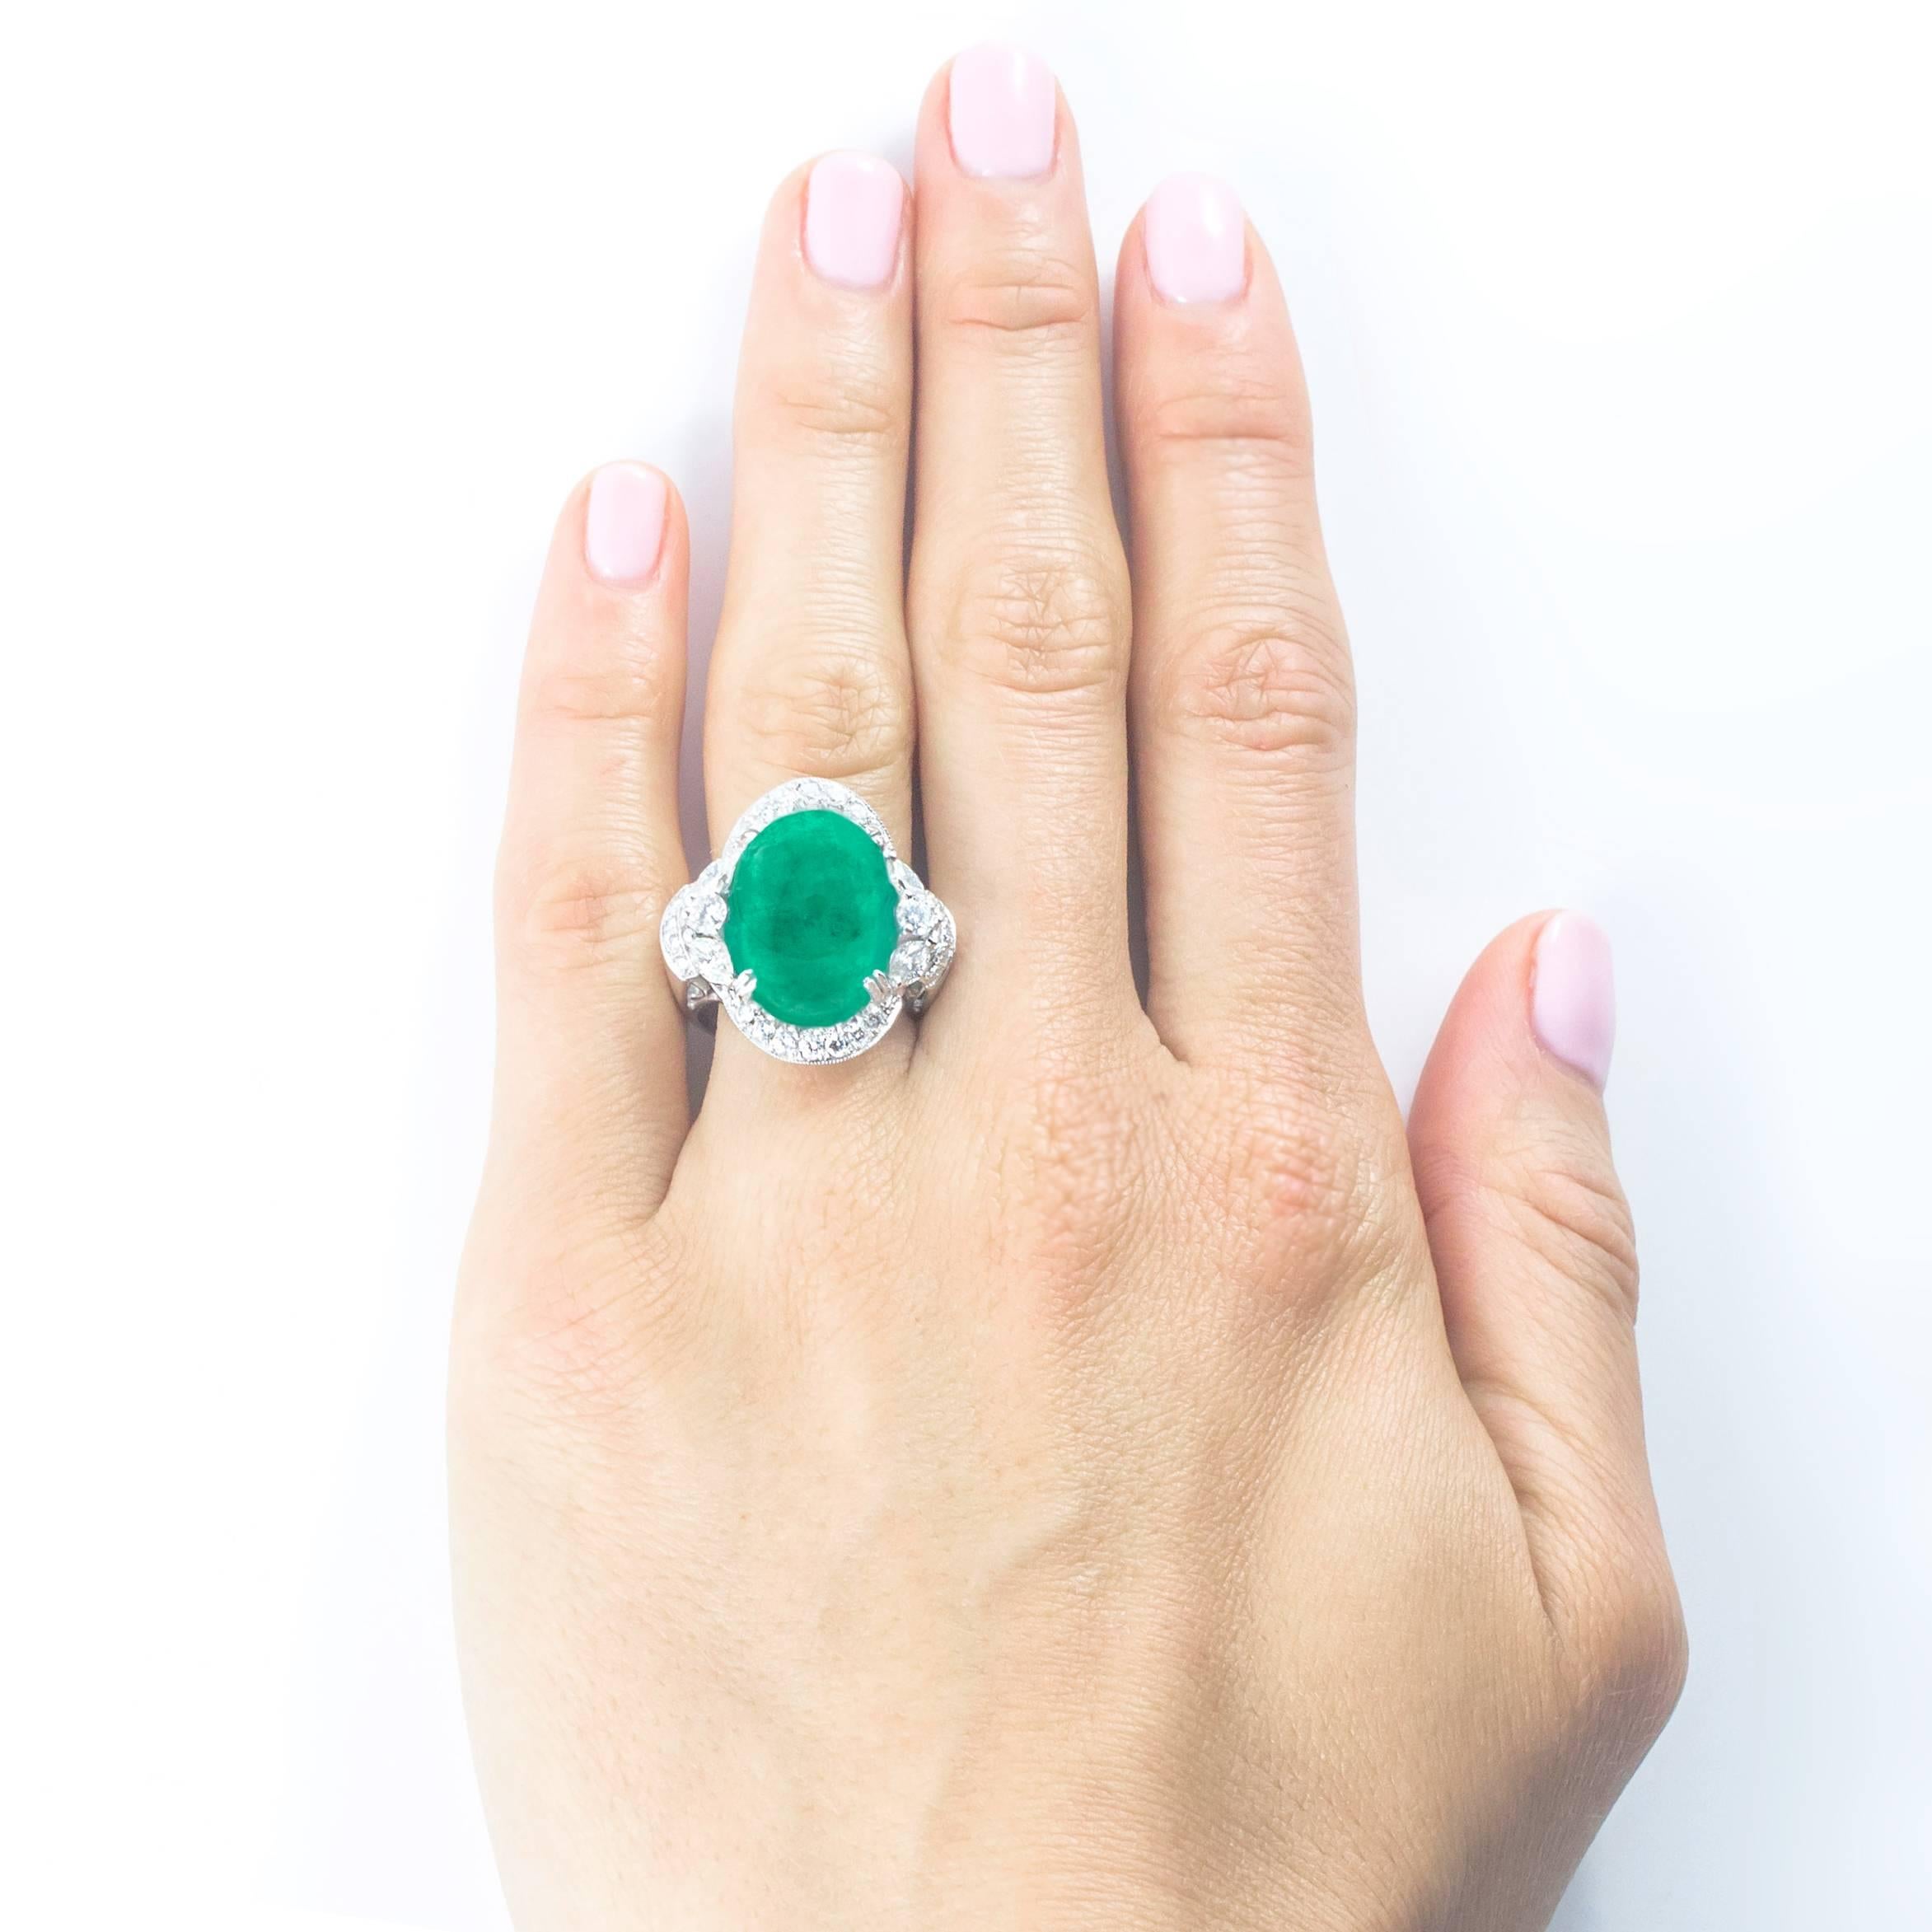 A gorgeous cabochon cut Columbian Emerald measuring approximately  17.70mm x 12.30mm x 7mm, weighing 10.80 carats is set with a diamond surround, in a beautiful, hand crafted 18 Karat white gold mount. 

The Emerald is flanked by 6 large marquise